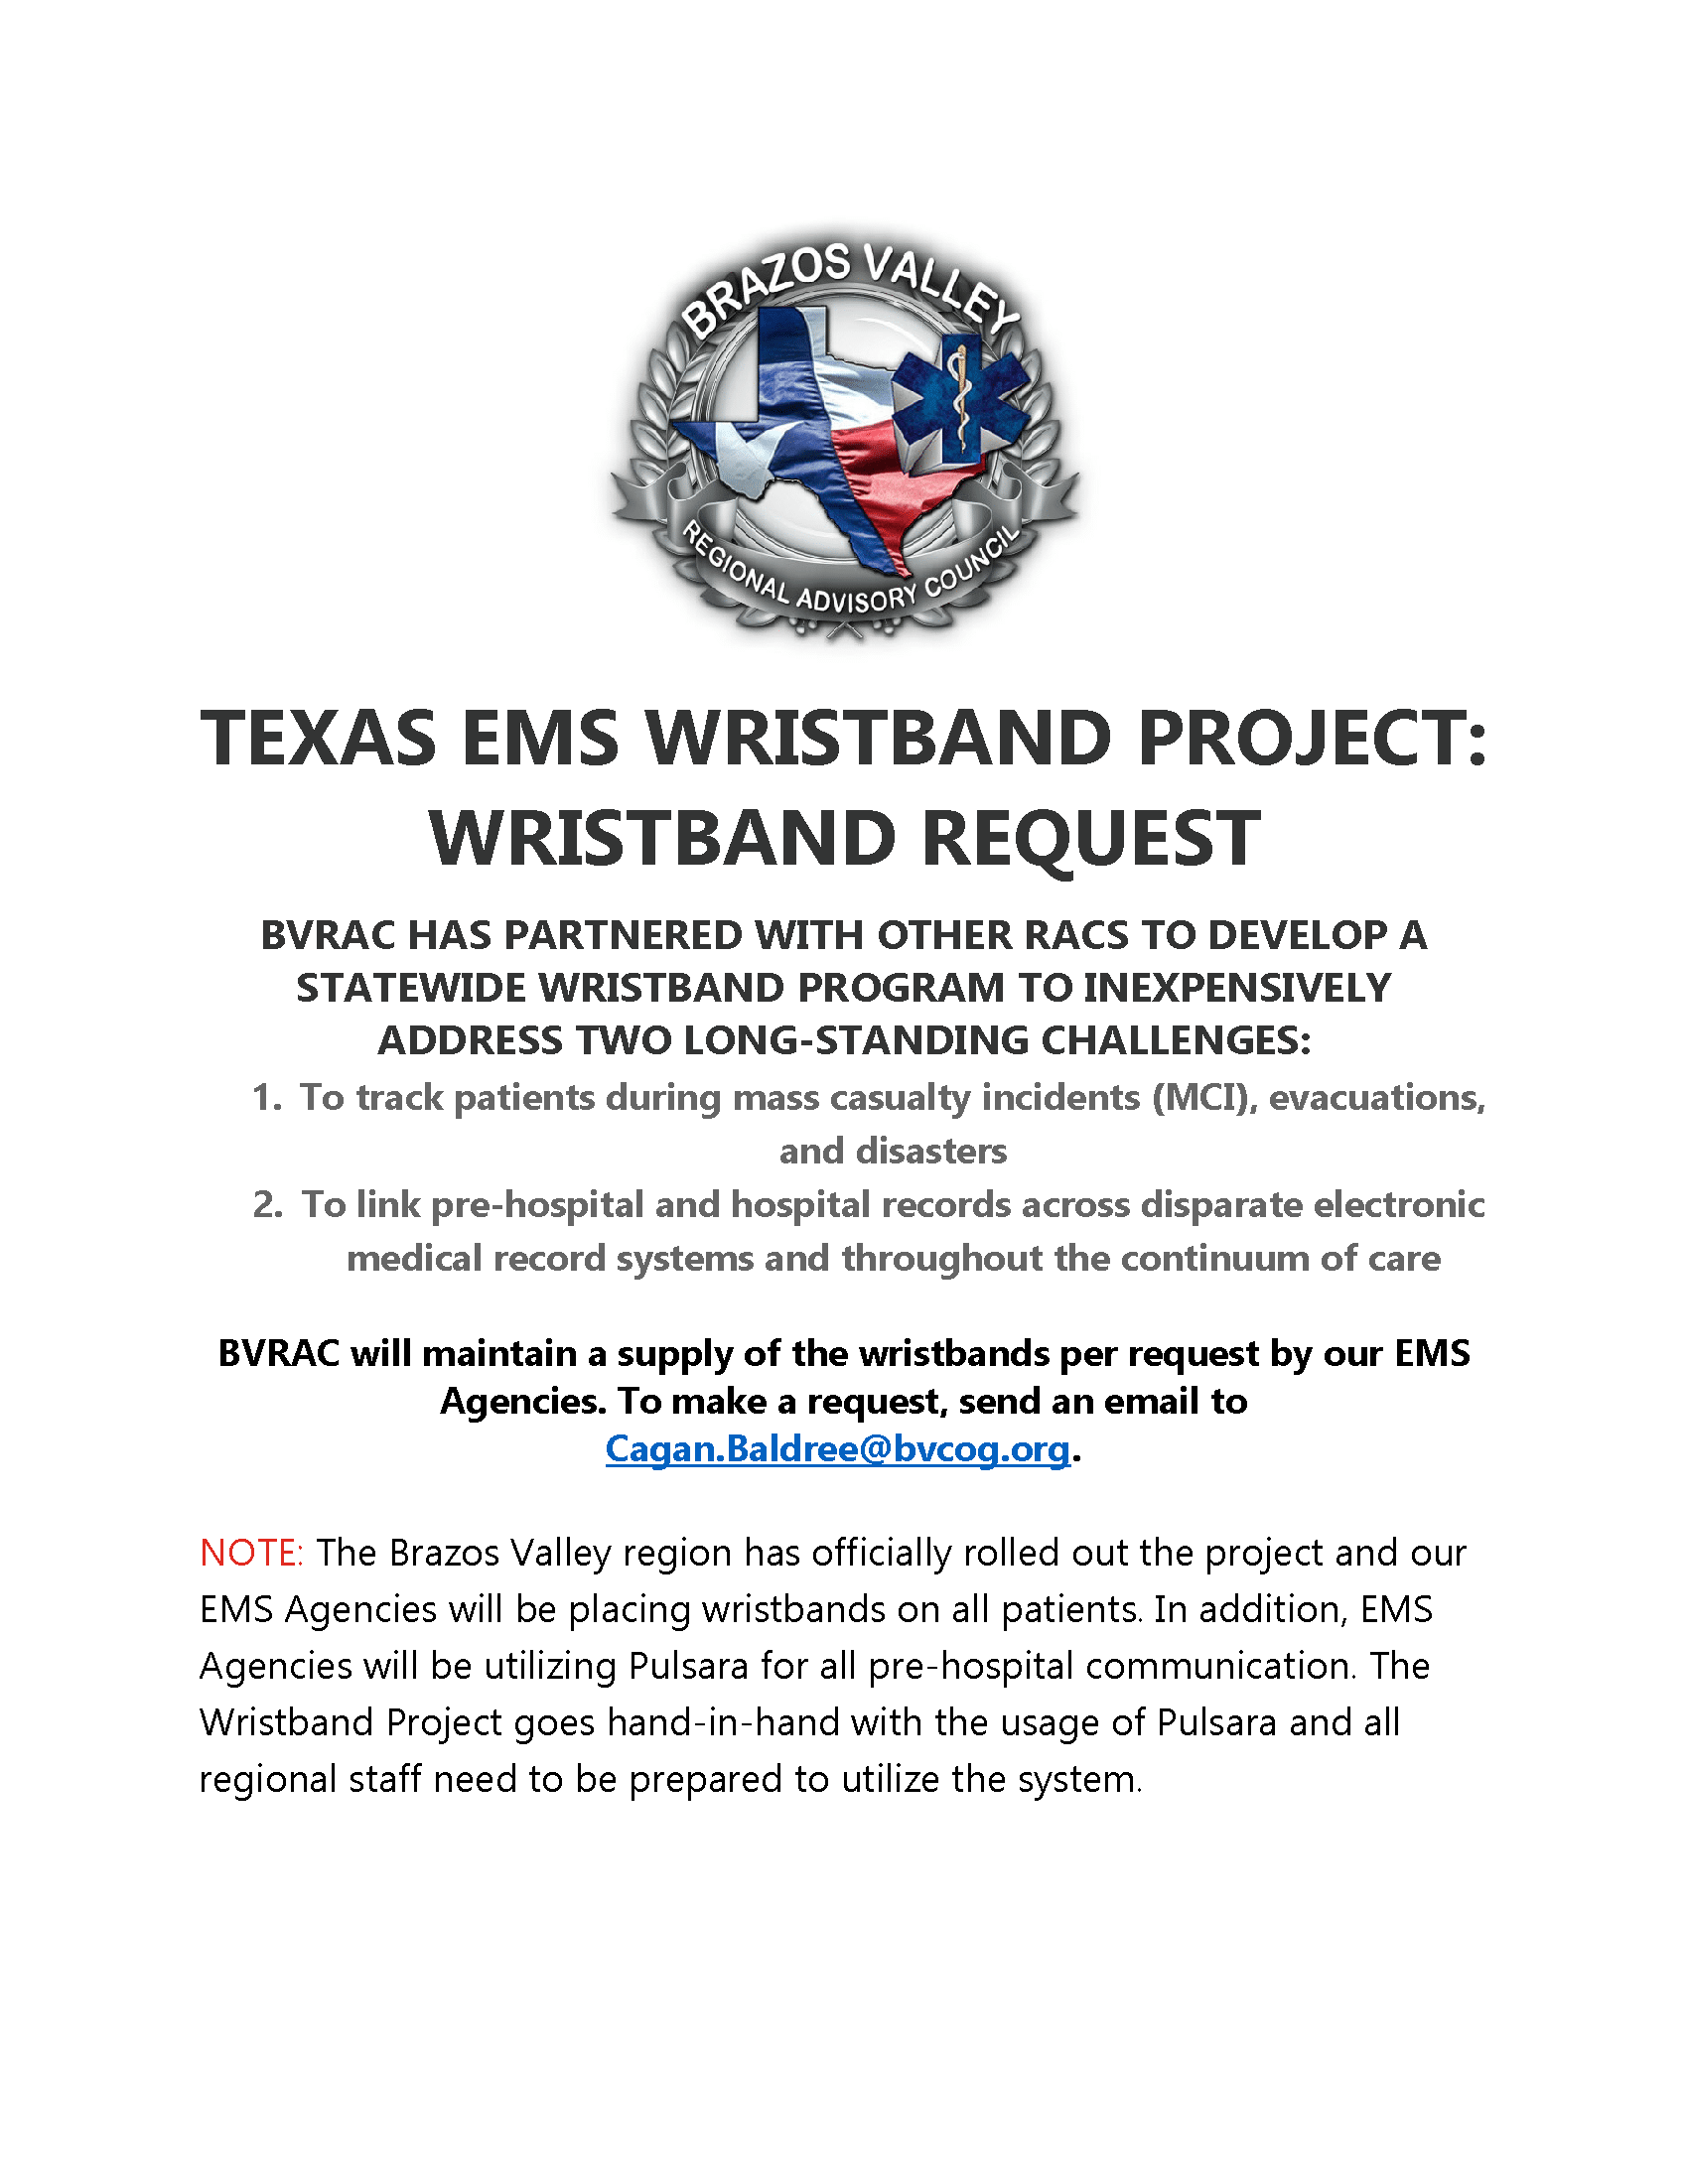 TEXAS EMS WRISTBAND PROJECT - Website Notice